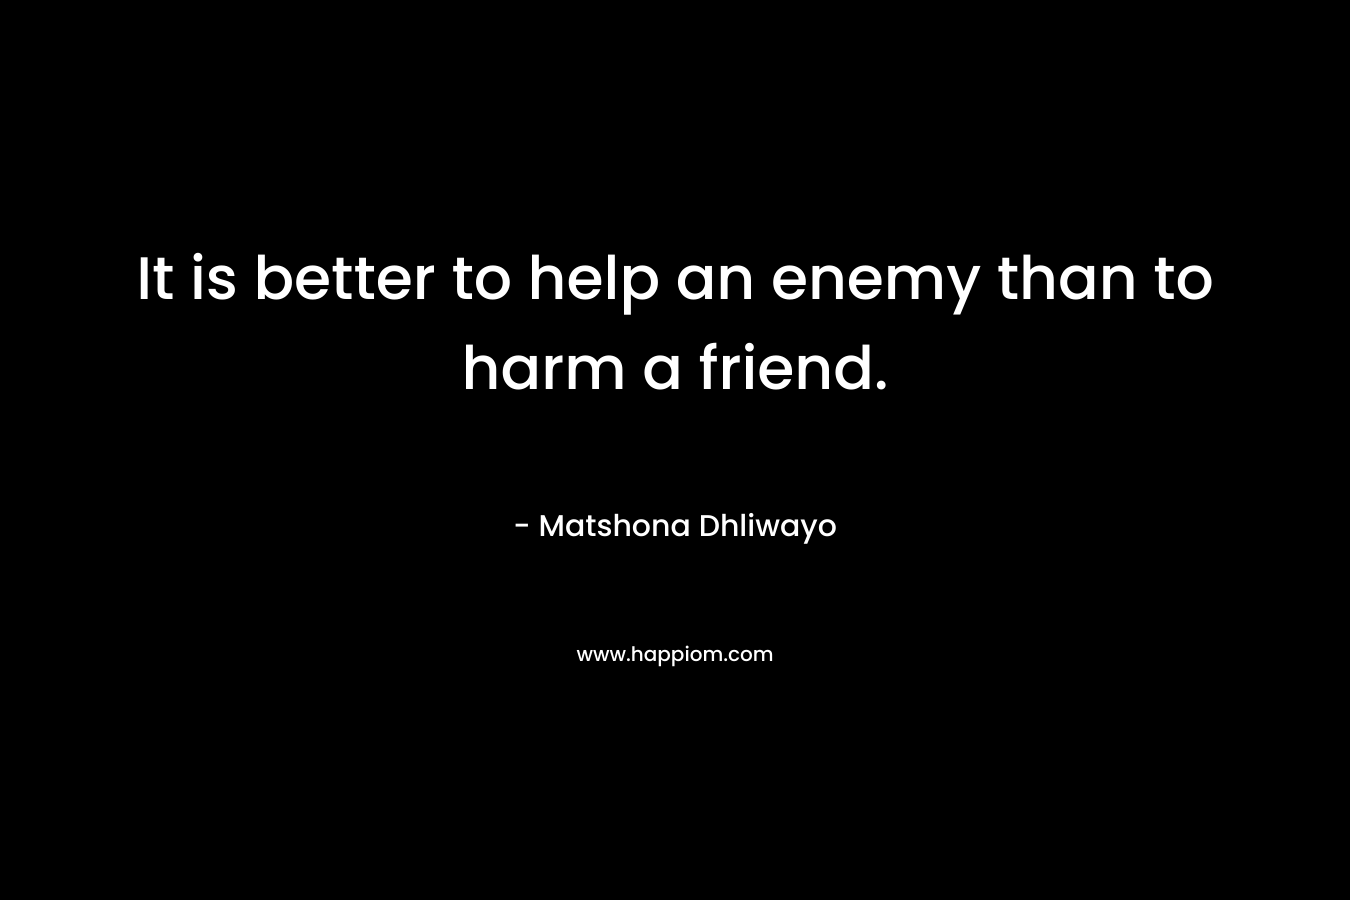 It is better to help an enemy than to harm a friend.